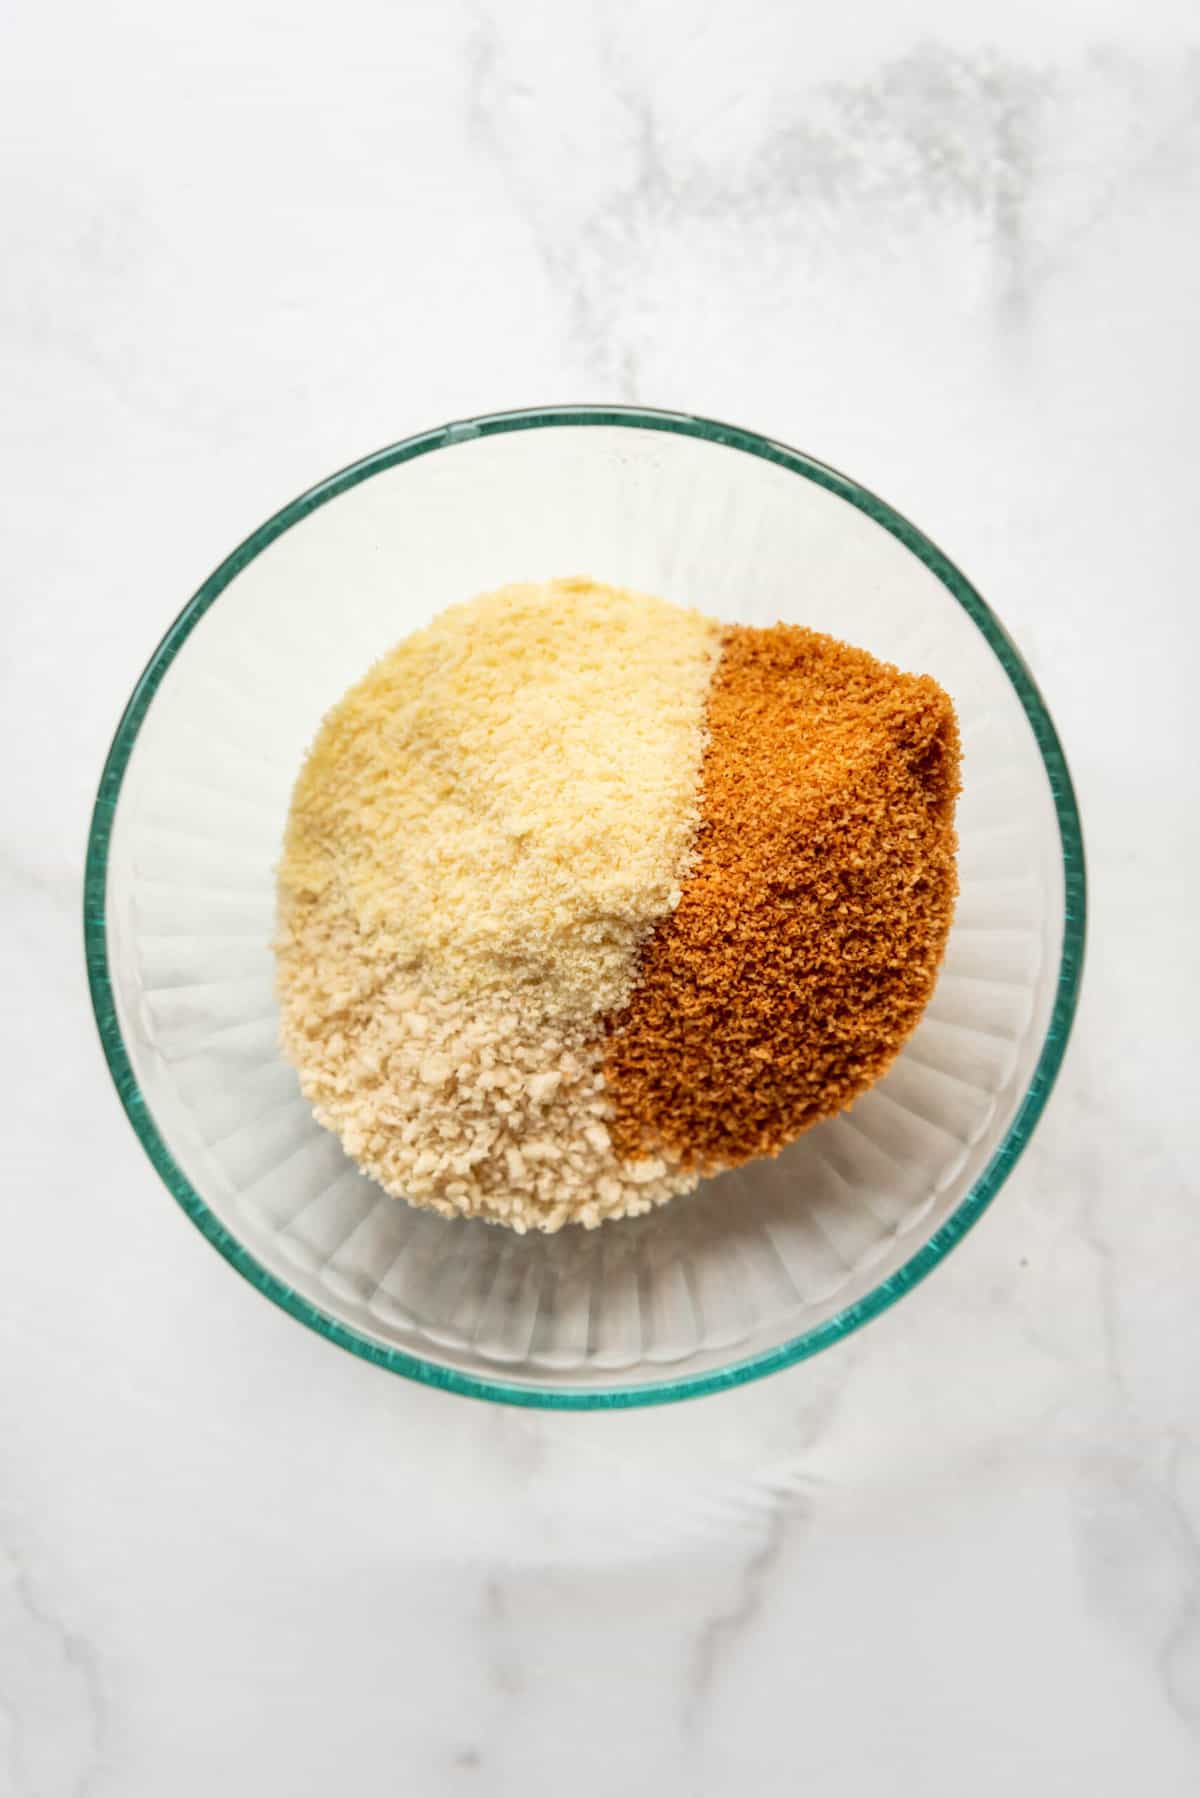 Combining Panko breadcrumbs, powdered Parmesan cheese, and Shake & Bake in a large bowl.